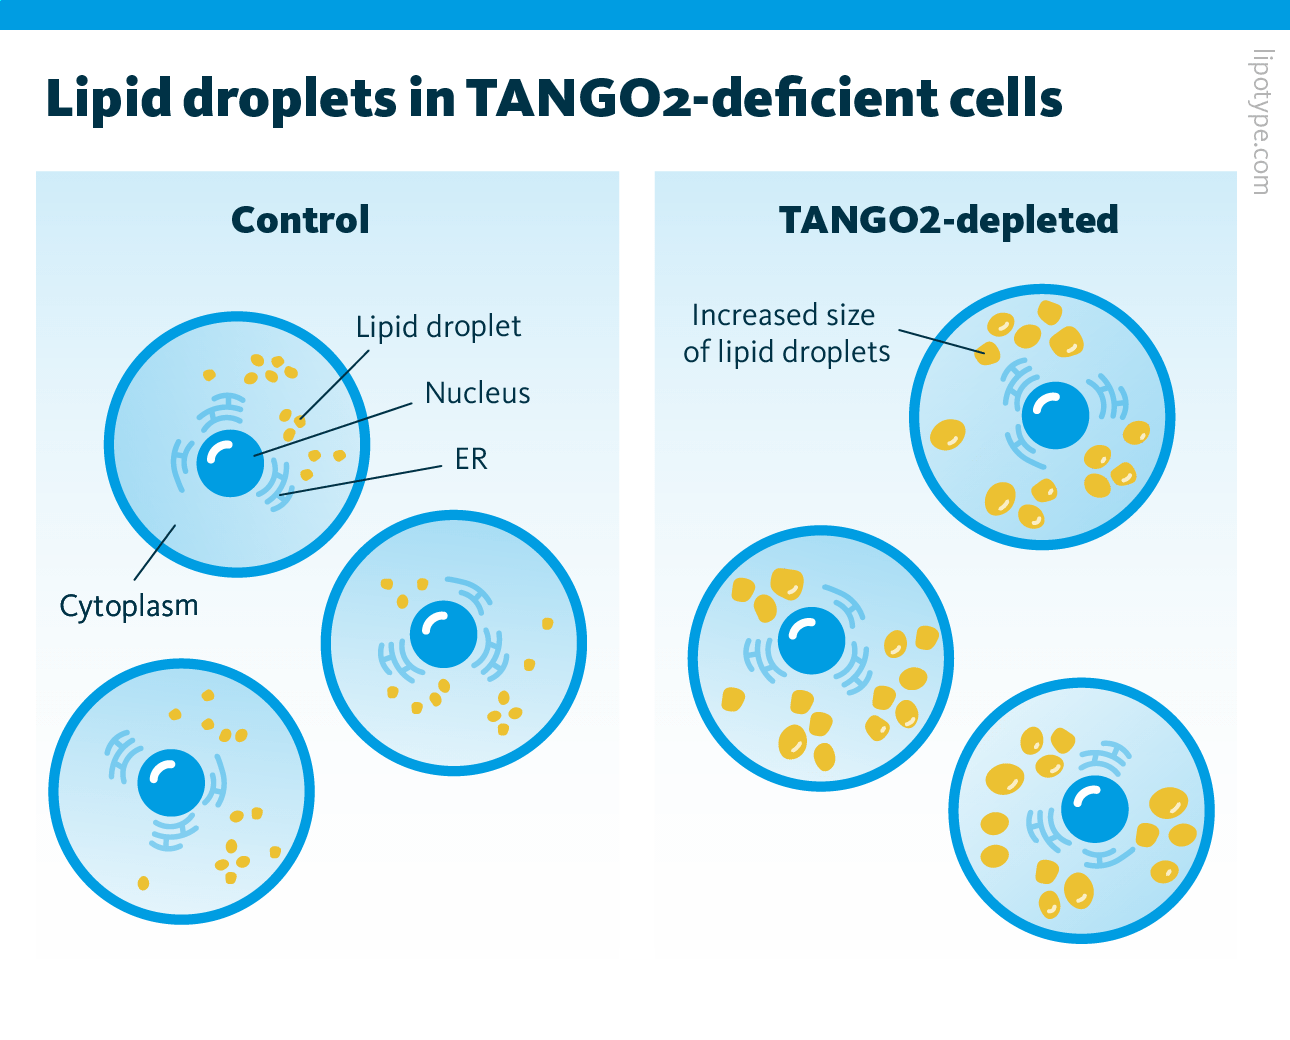 TANGO2-lacking cells contain larger LDs. Schematic representation of liver cancer cells with normal TANGO2 (left image) and silenced TANGO2 (right image). TANGO2-depleted cells have more lipid droplets compared to control cells.